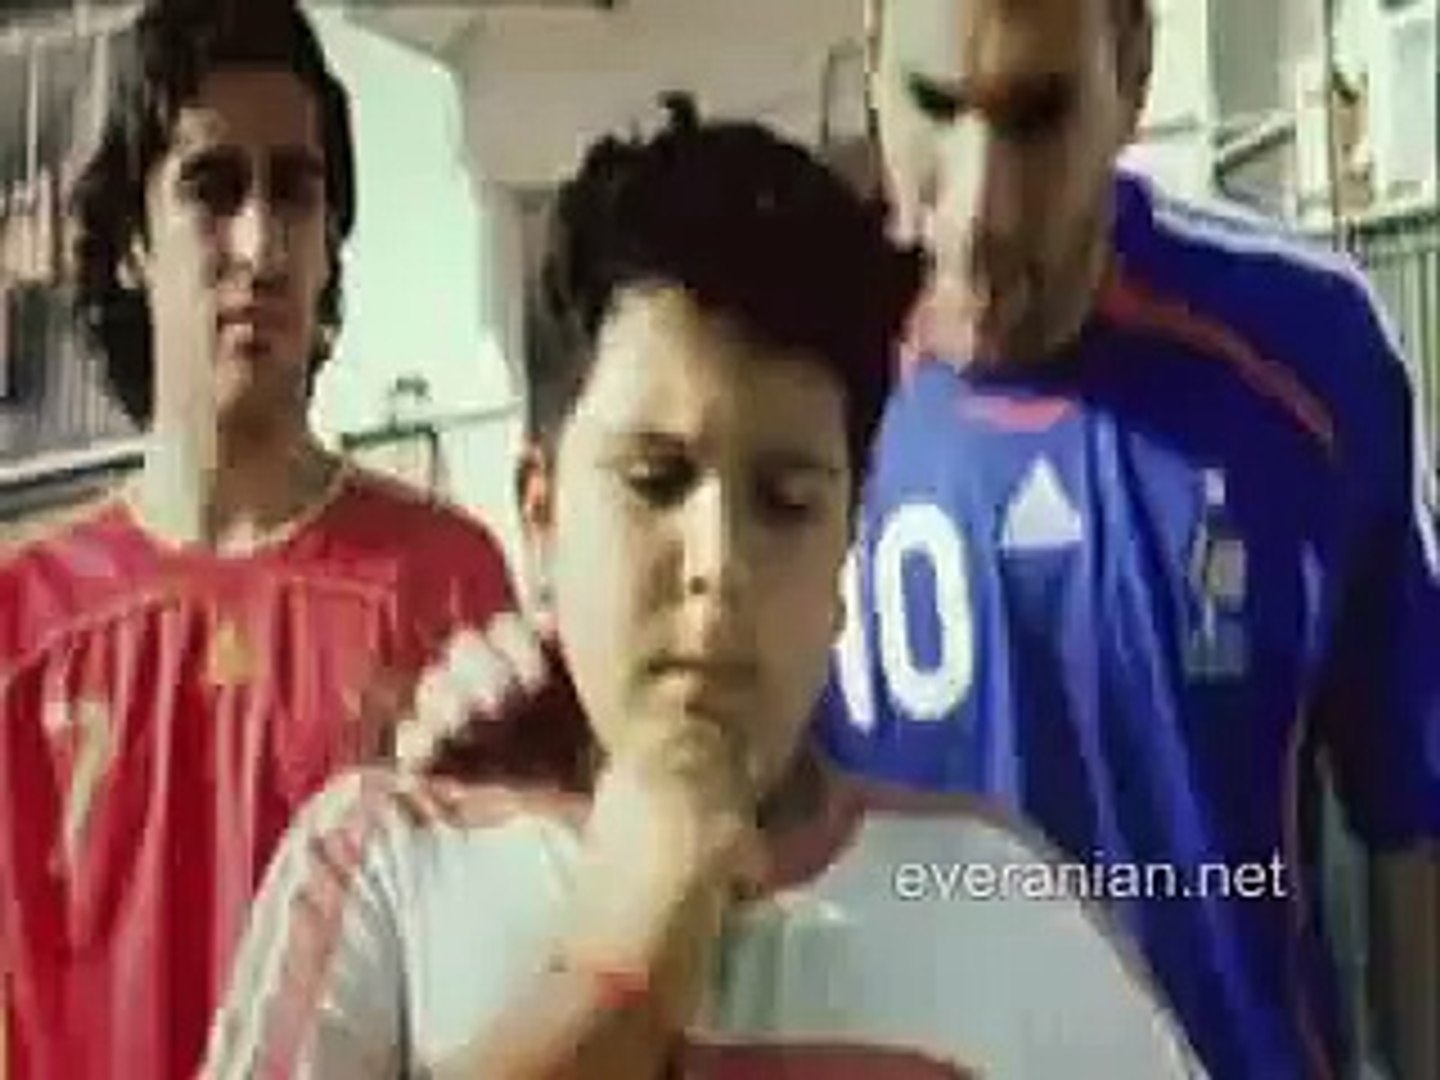 adidas commercial jose